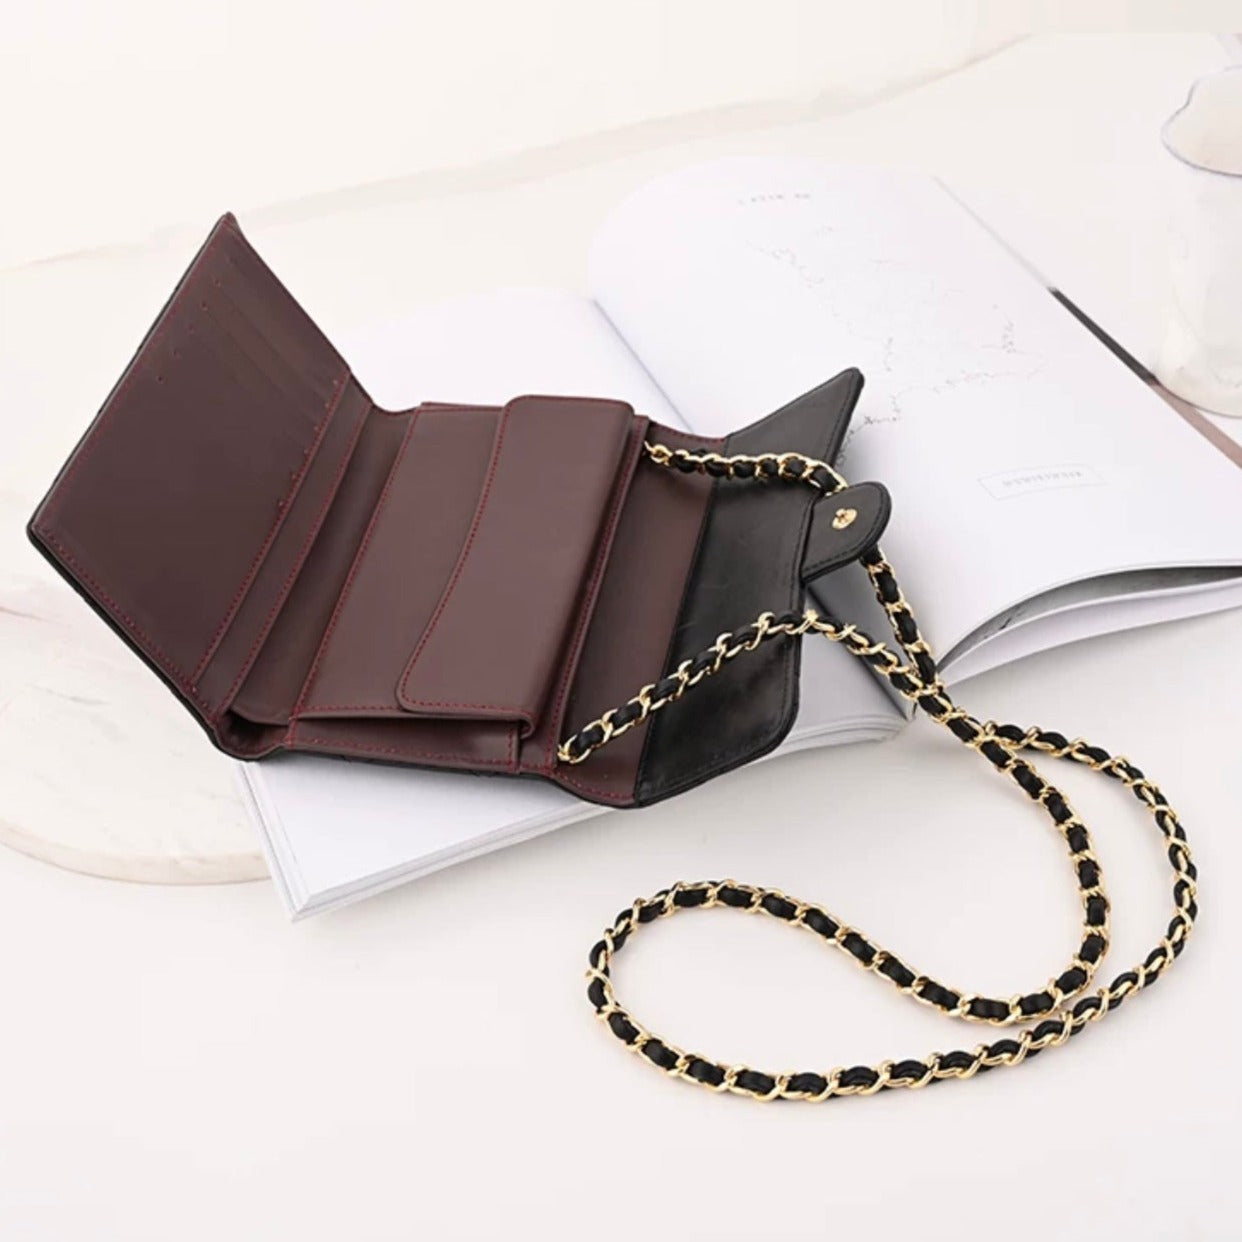 DIY Kit Chain+Insert Change Your Tri-fold Small Wallet To A Crossbody Purse